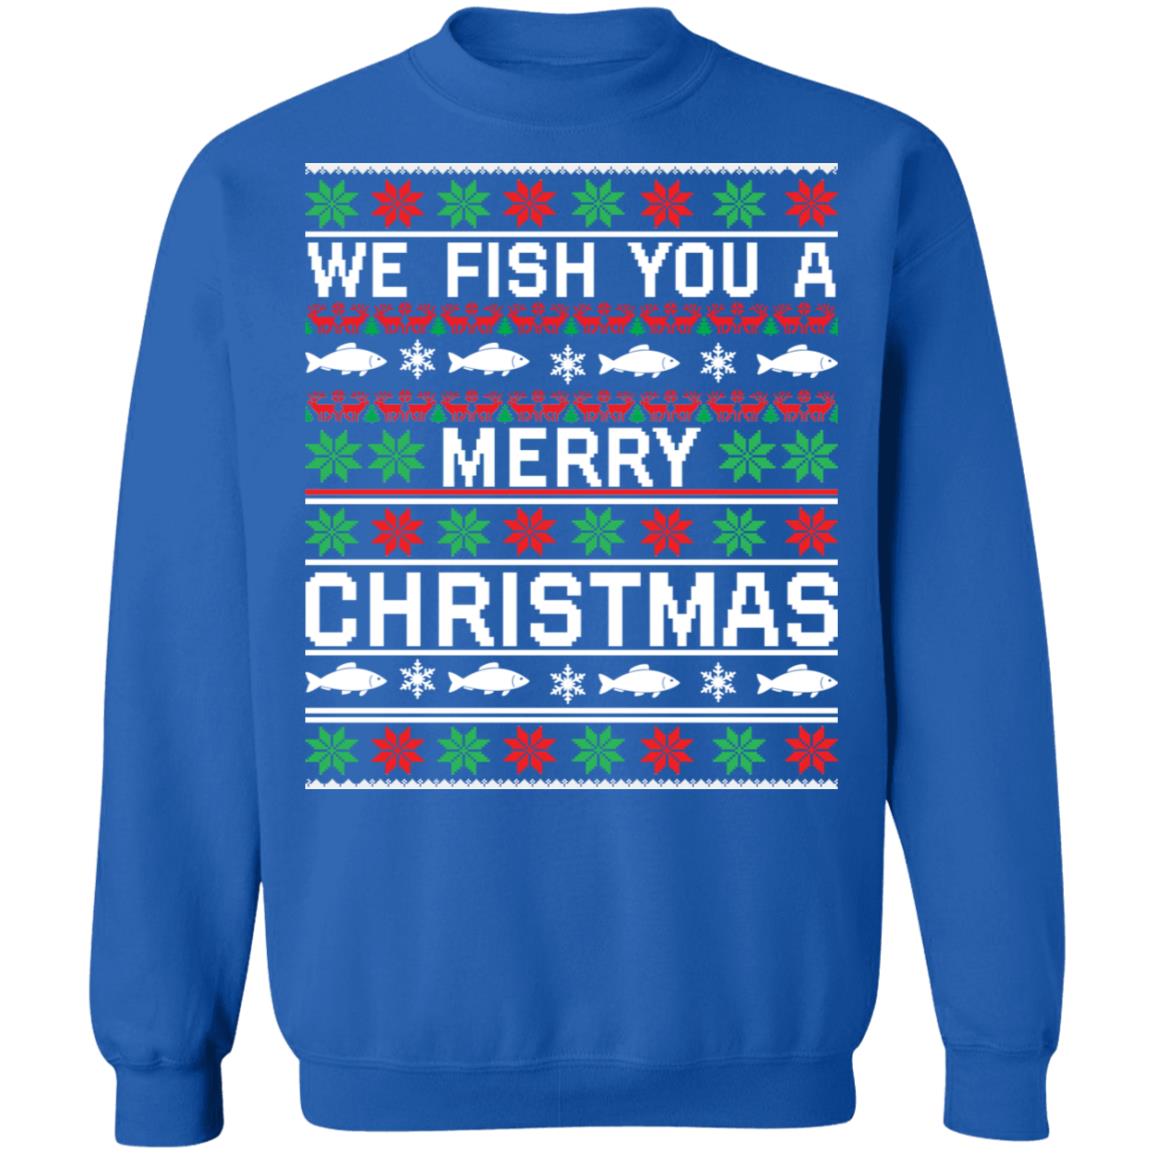 We fish you a merry Christmas sweater 